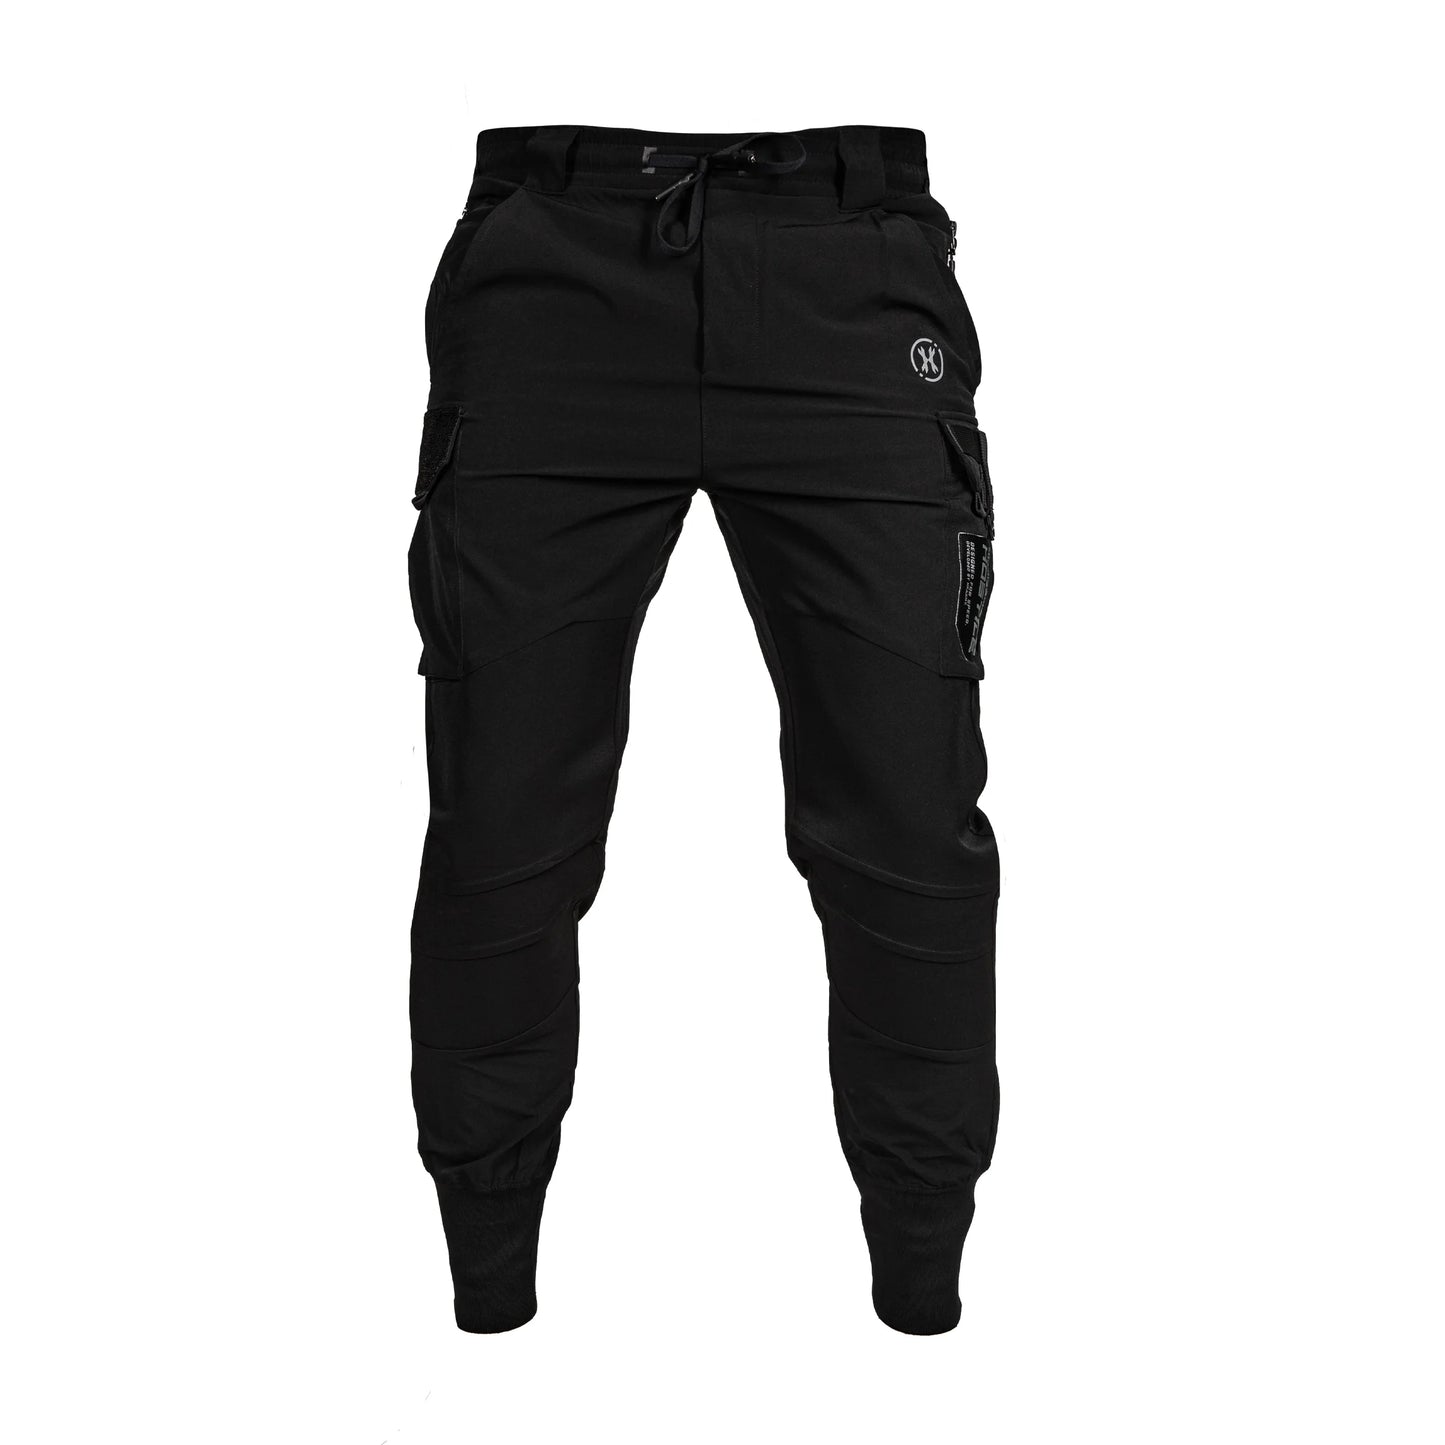 RECON JOGGER PANT - STEALTH